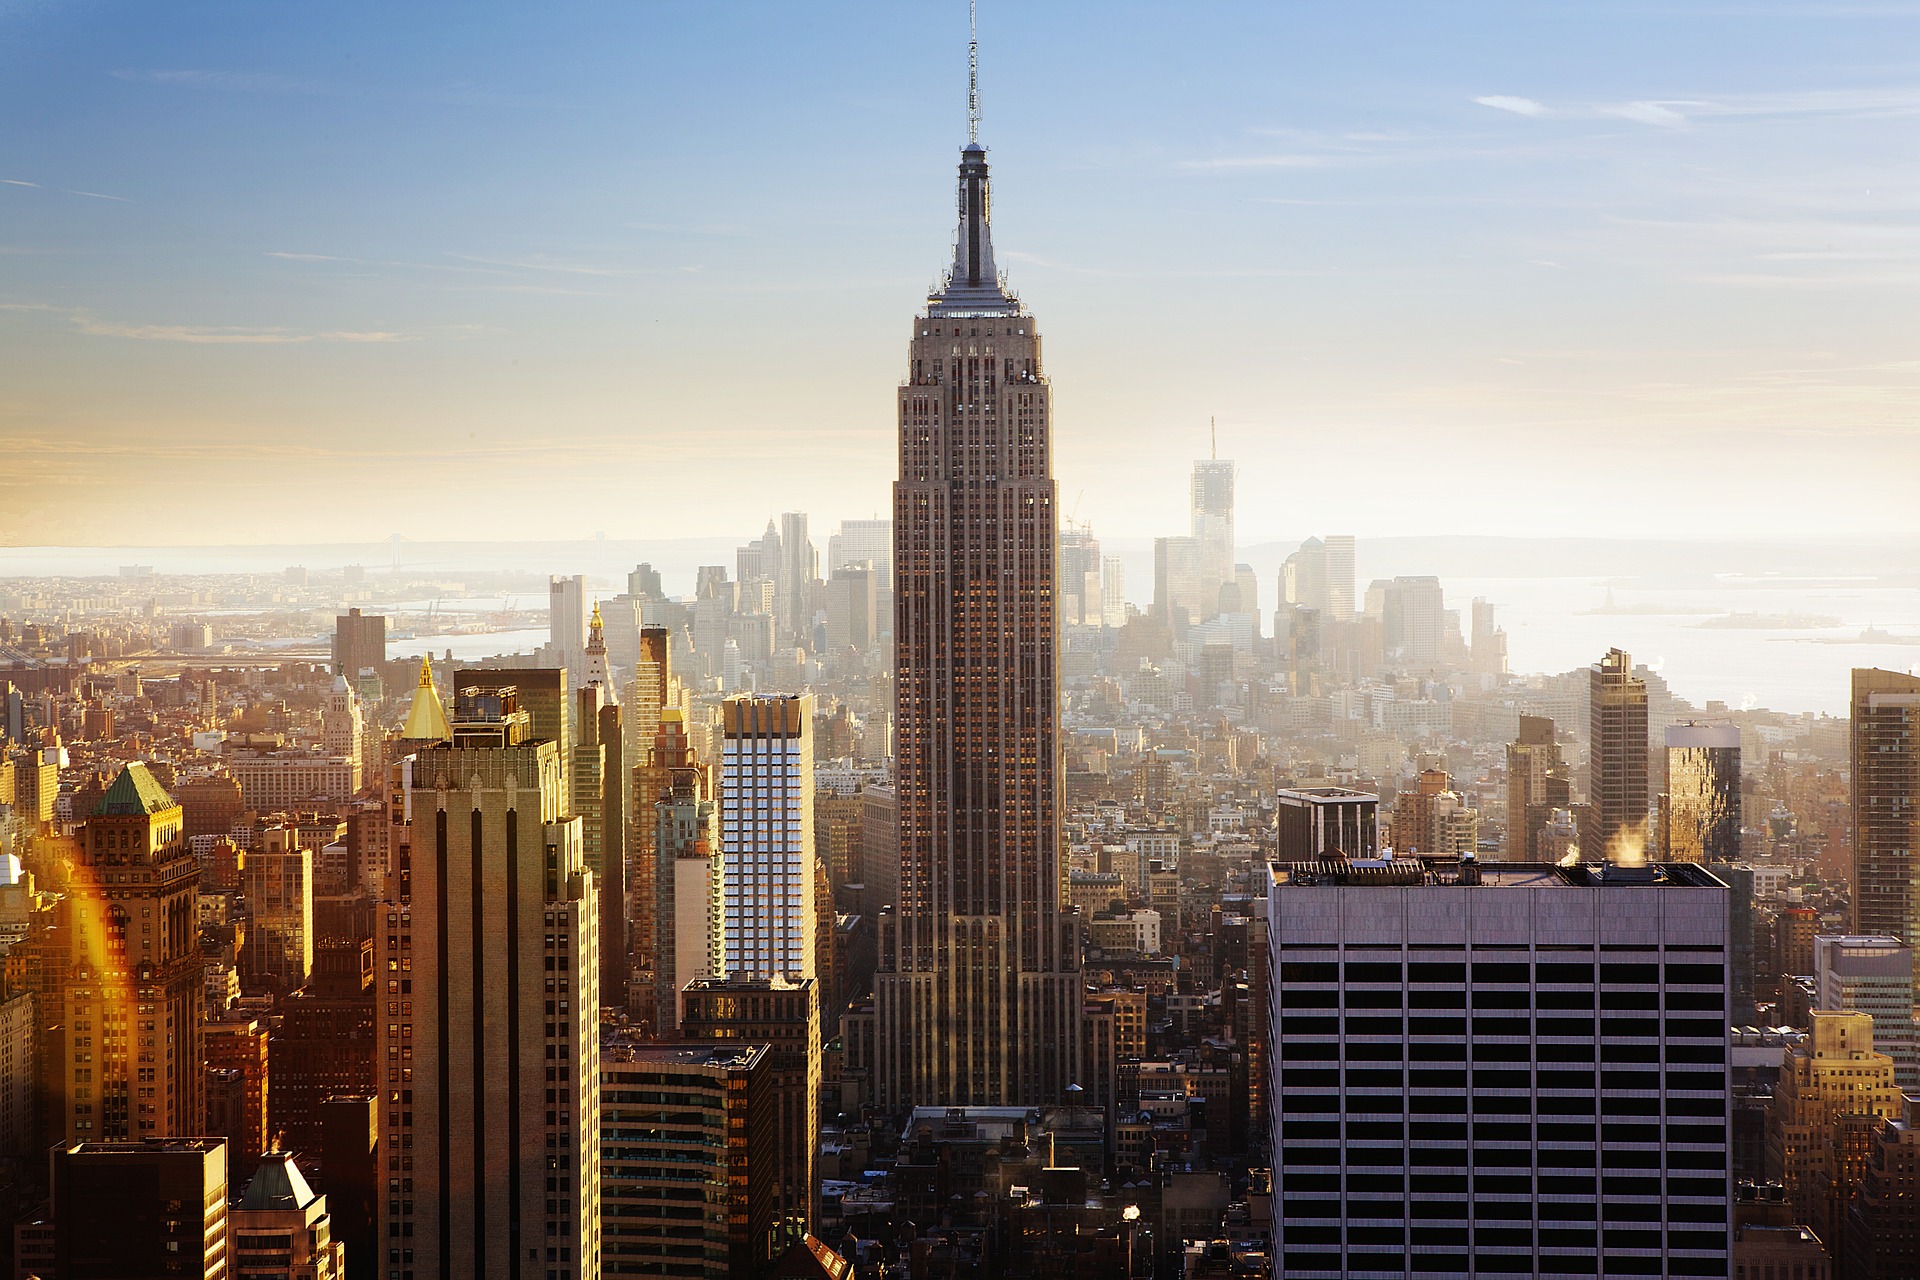 Empire State Building by Pixabay